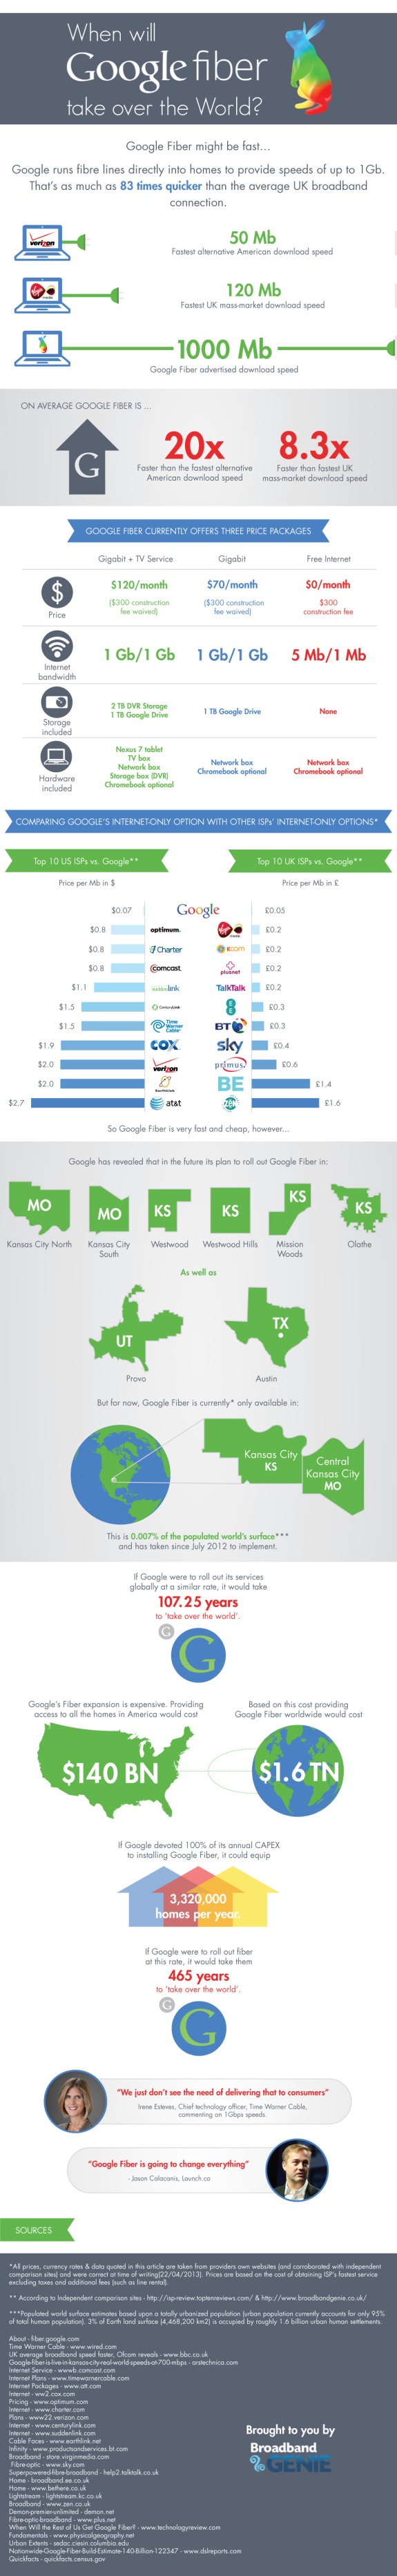 Google Fiber Infographic: Will it Take Over the World?